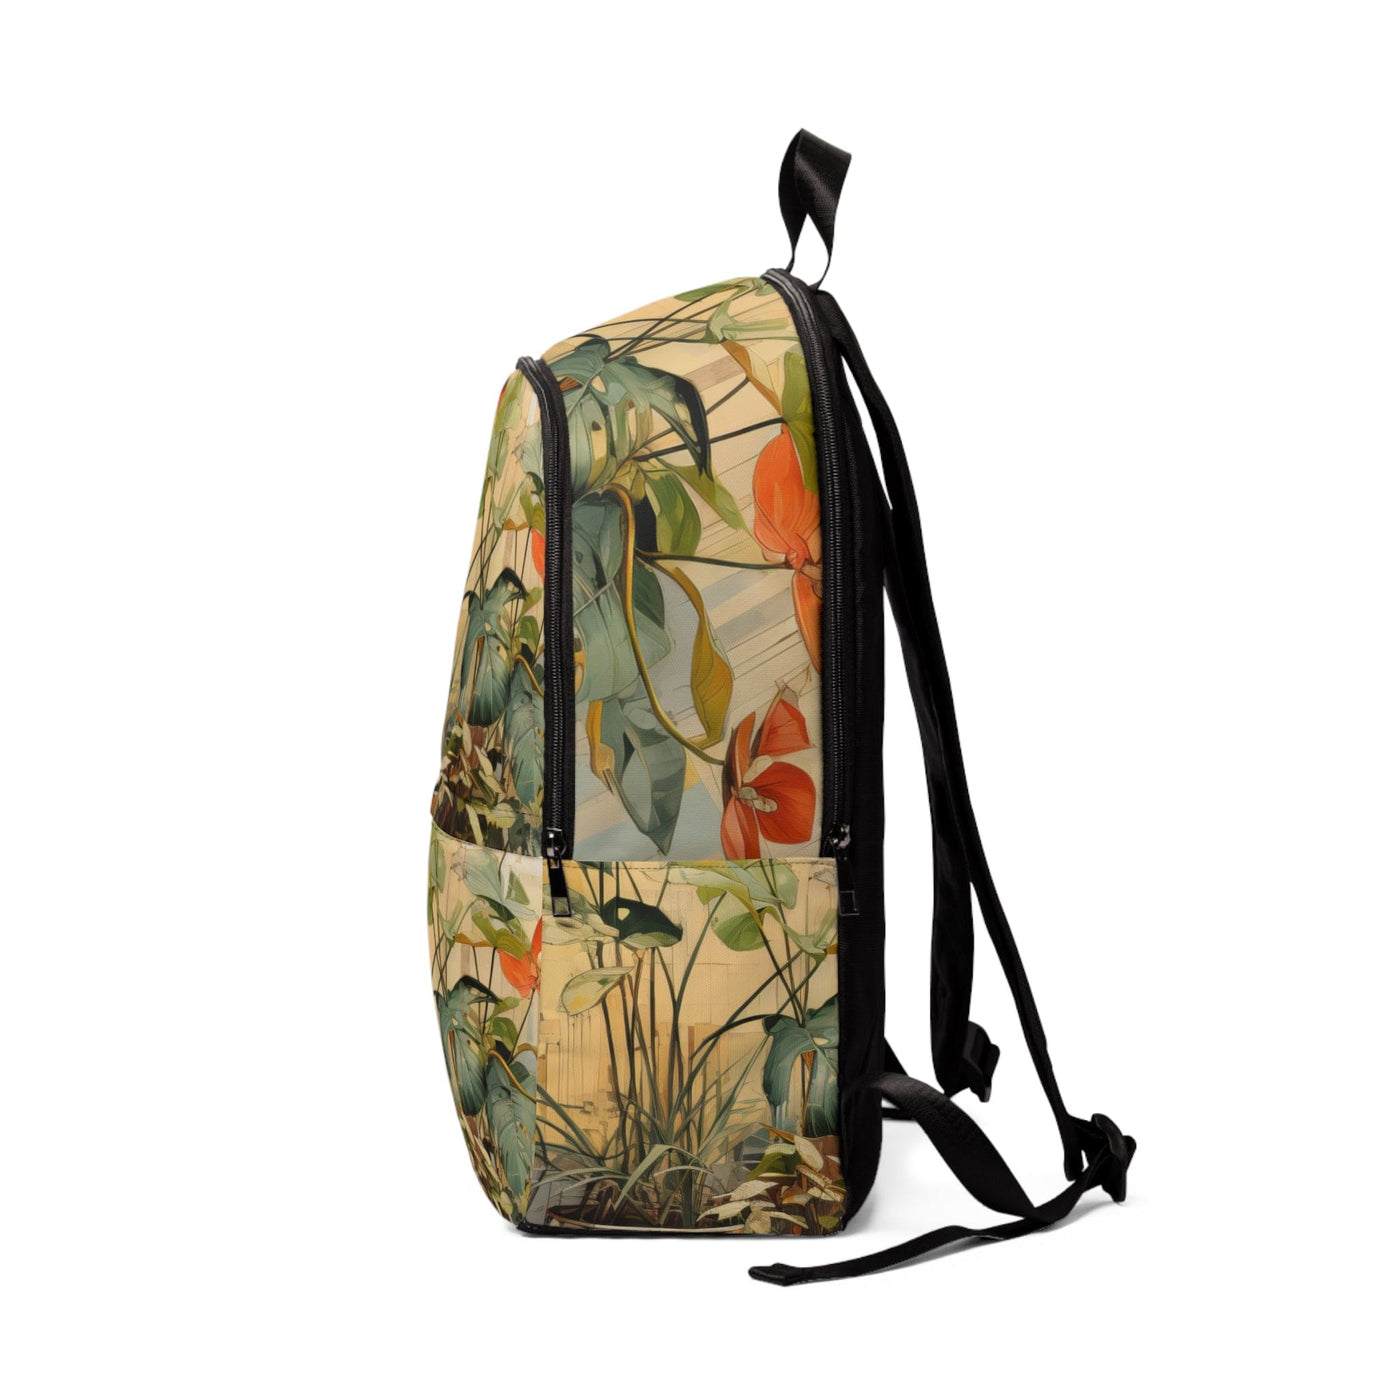 Fashion Backpack Waterproof Earthy Rustic Potted Plants Print - Bags